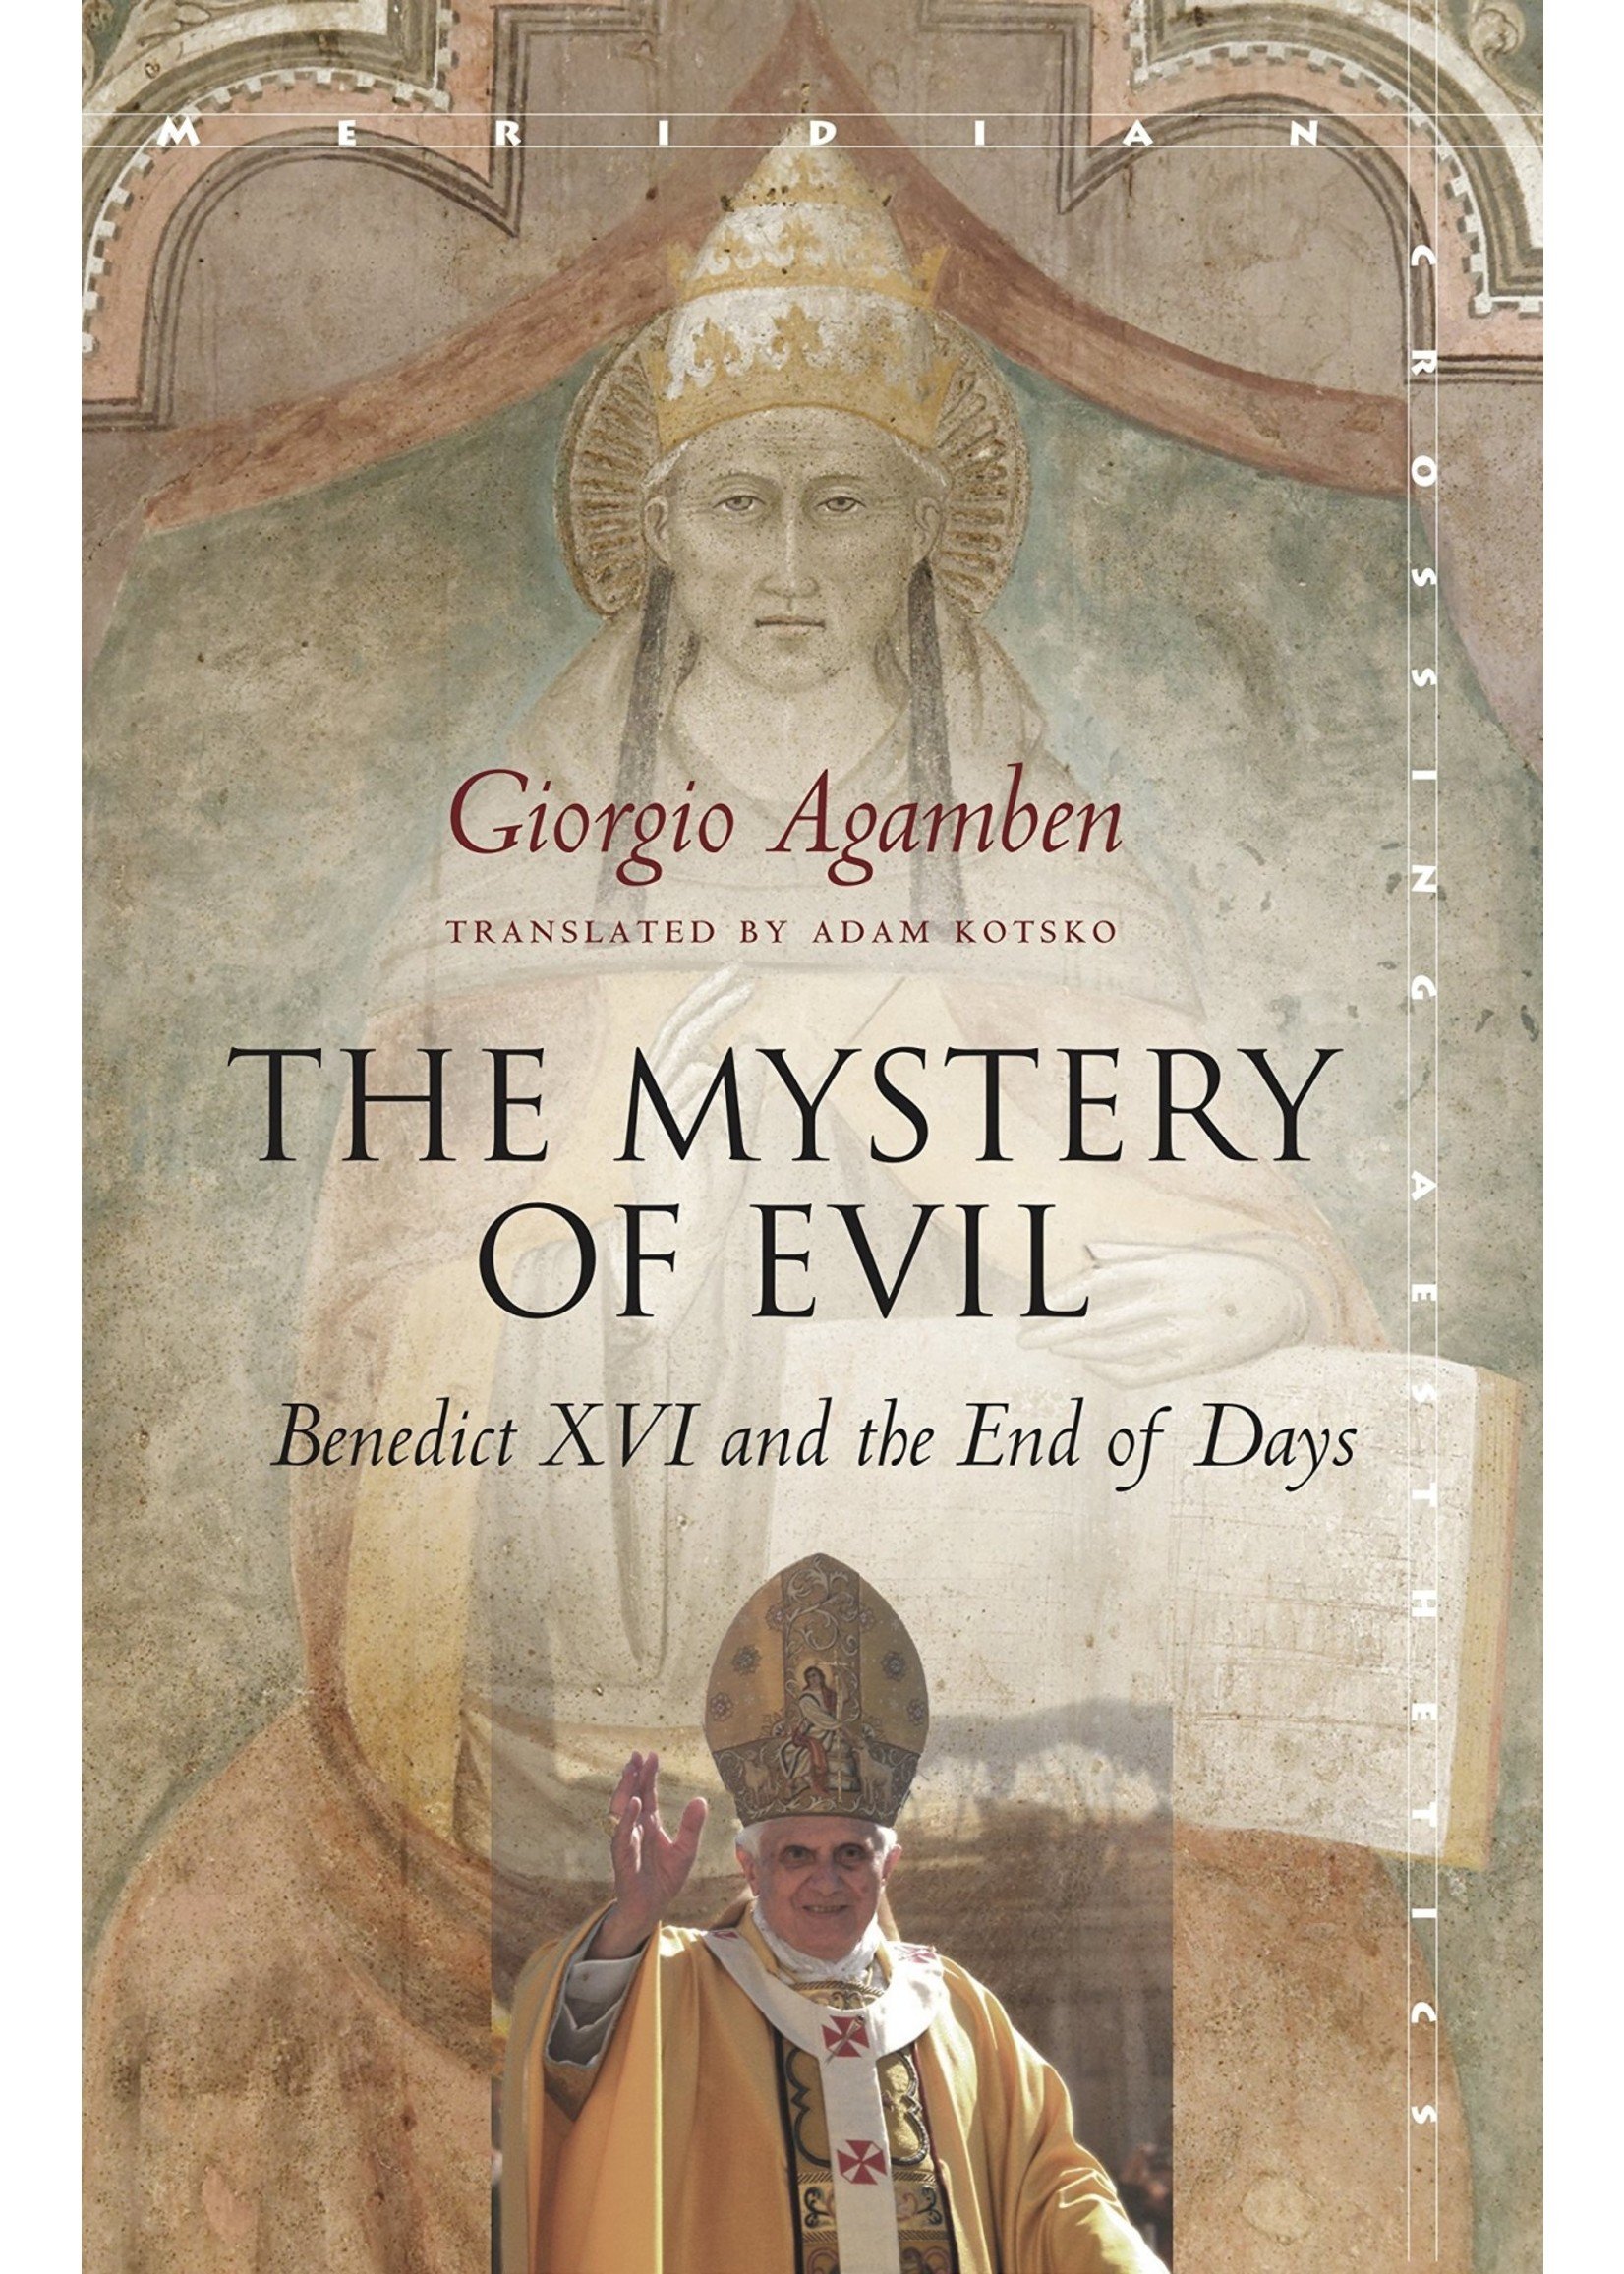 The Mystery of Evil: Benedict XVI and the End of Days